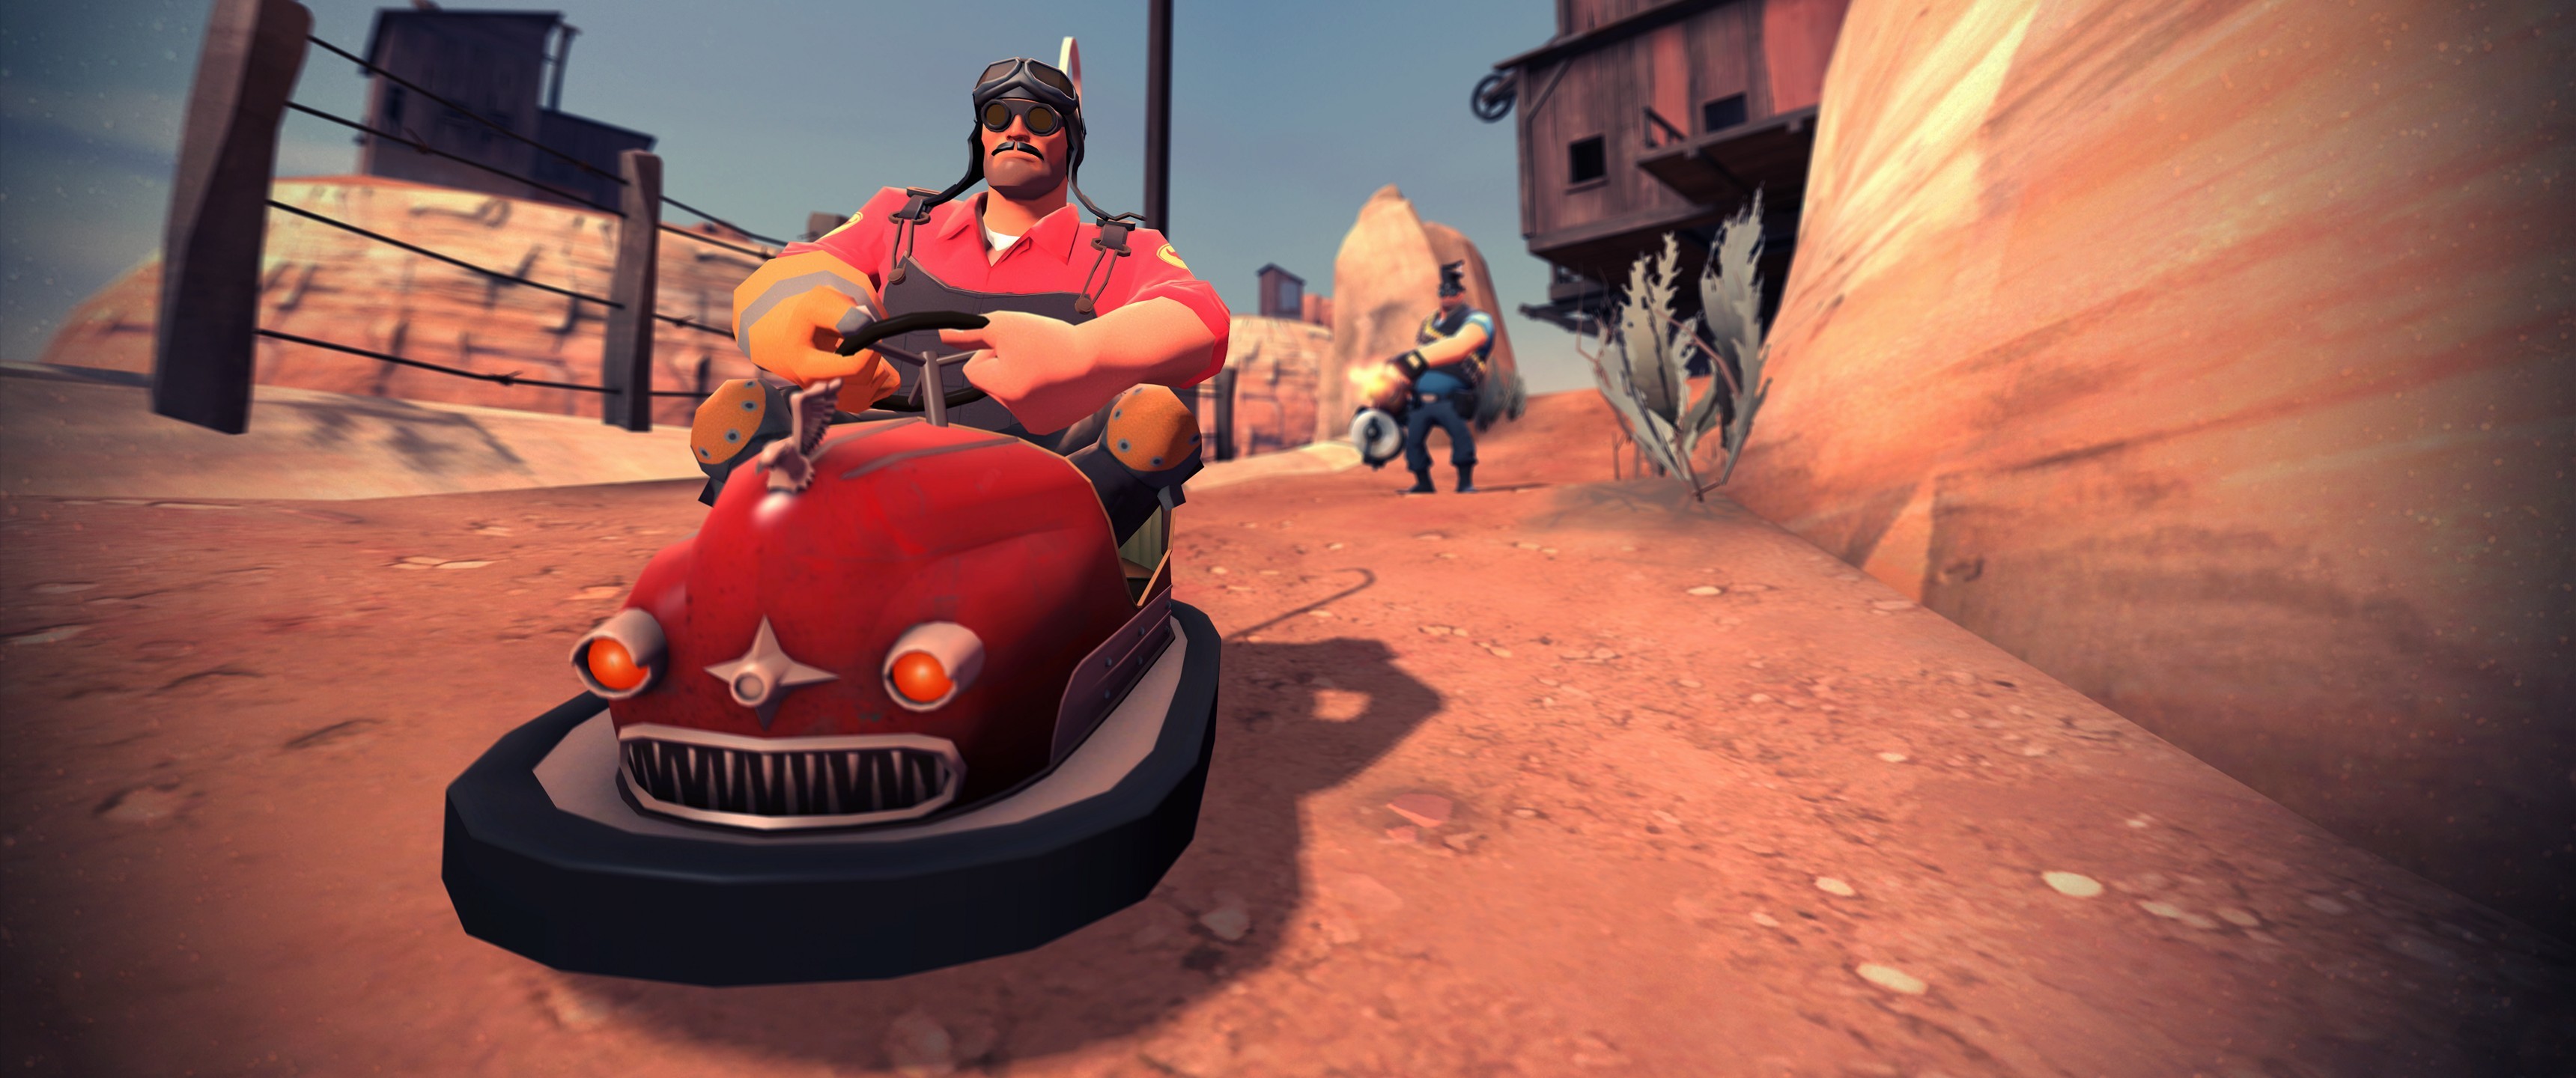 Team Fortress 2 Video Games Engineer Character Heavy Charater Scooters 3440x1440